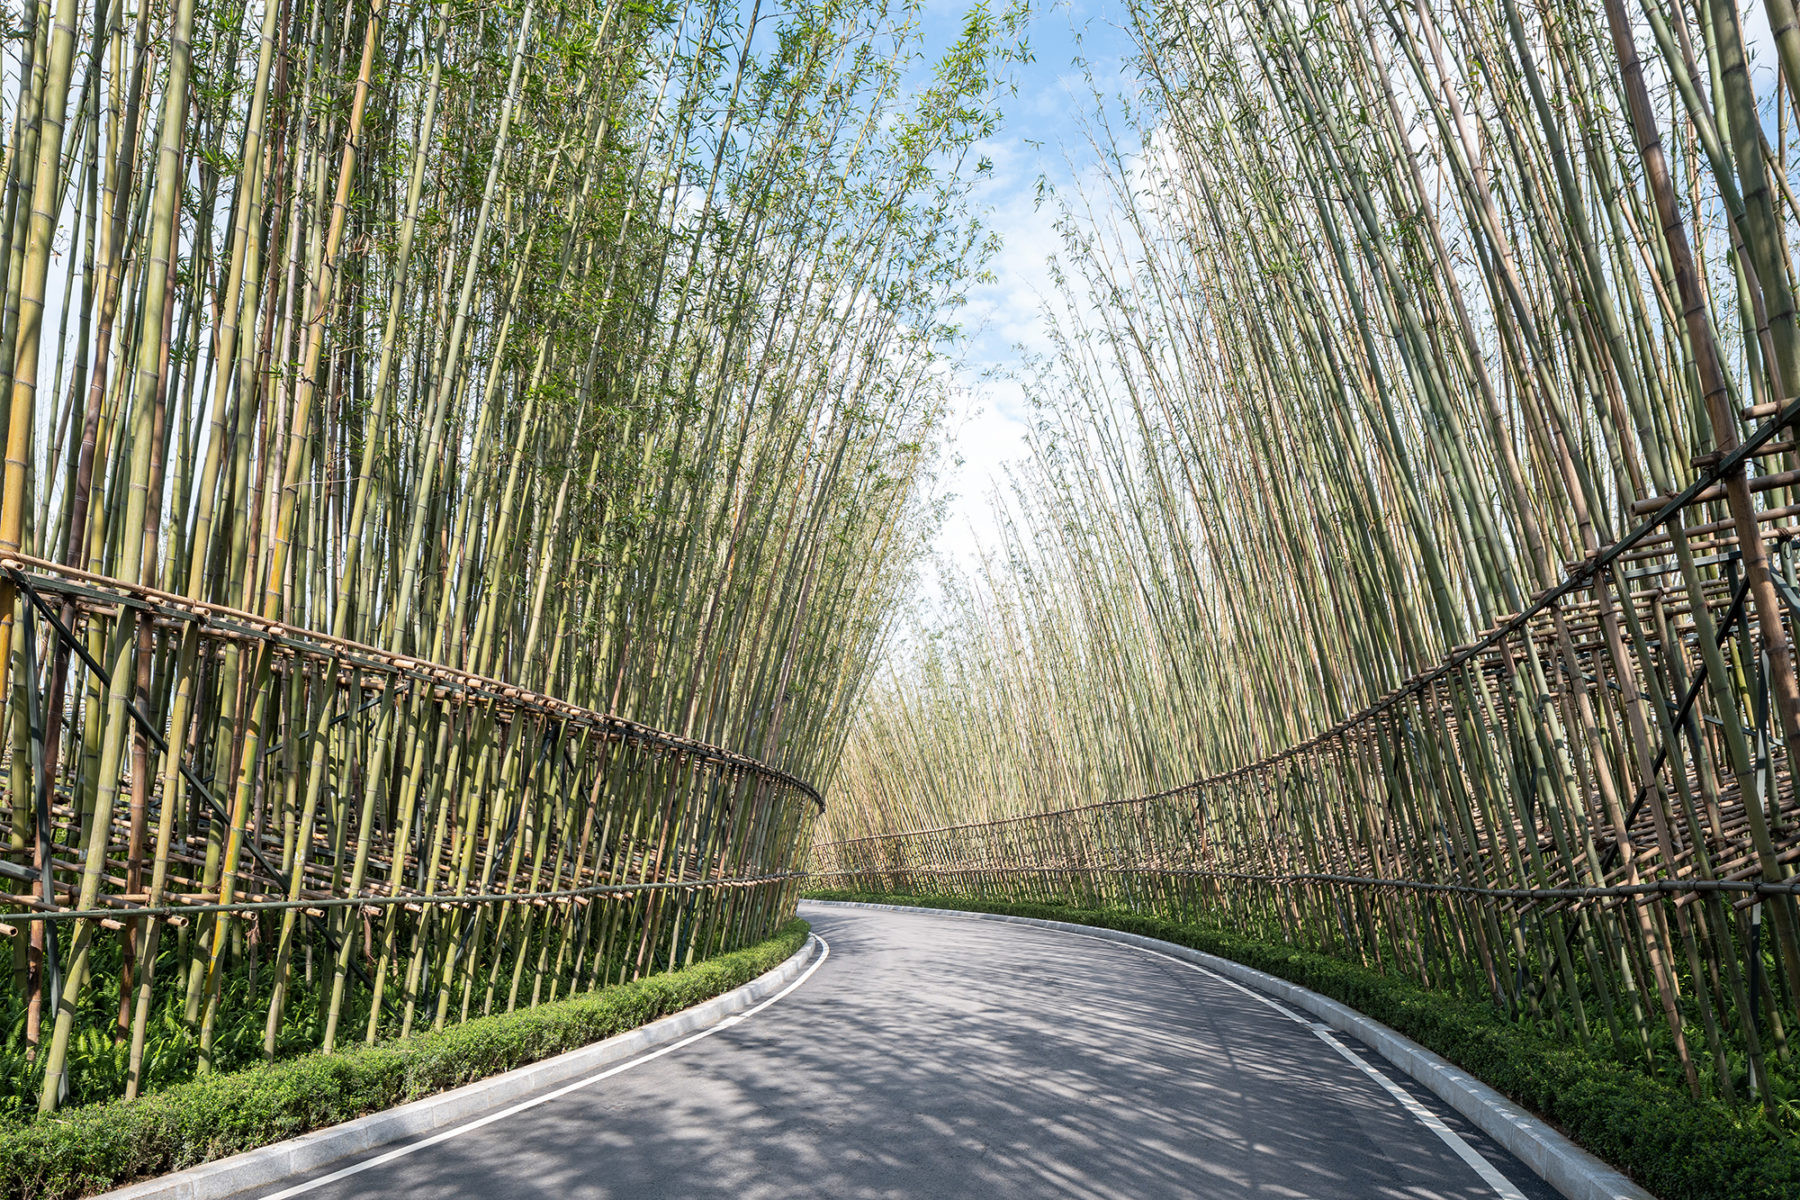 view of pathway through bamboo grove